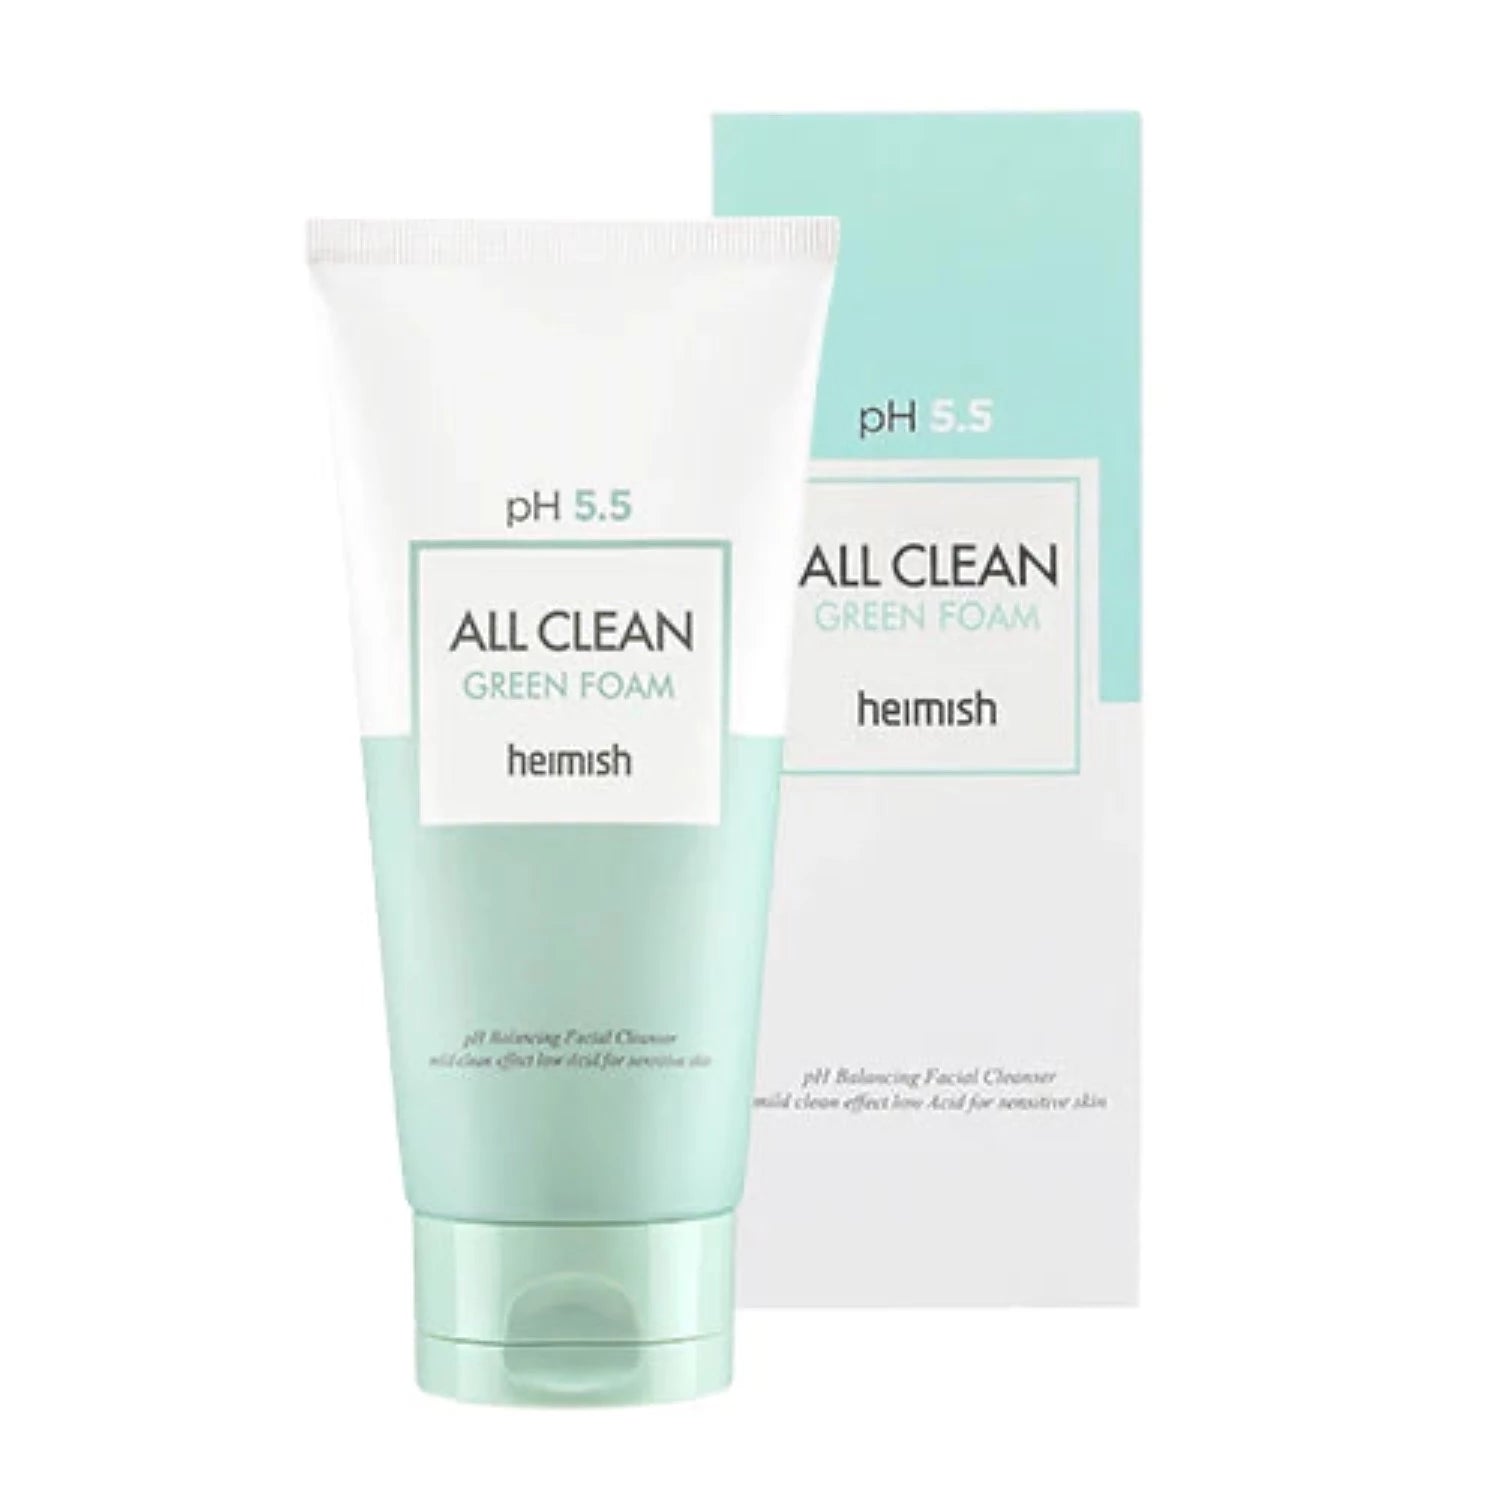 Heimish All Clean Green Foam Cleanser features pH-balancing and mild cleansing ingredients, with a low-acid formula suitable for sensitive skin. 